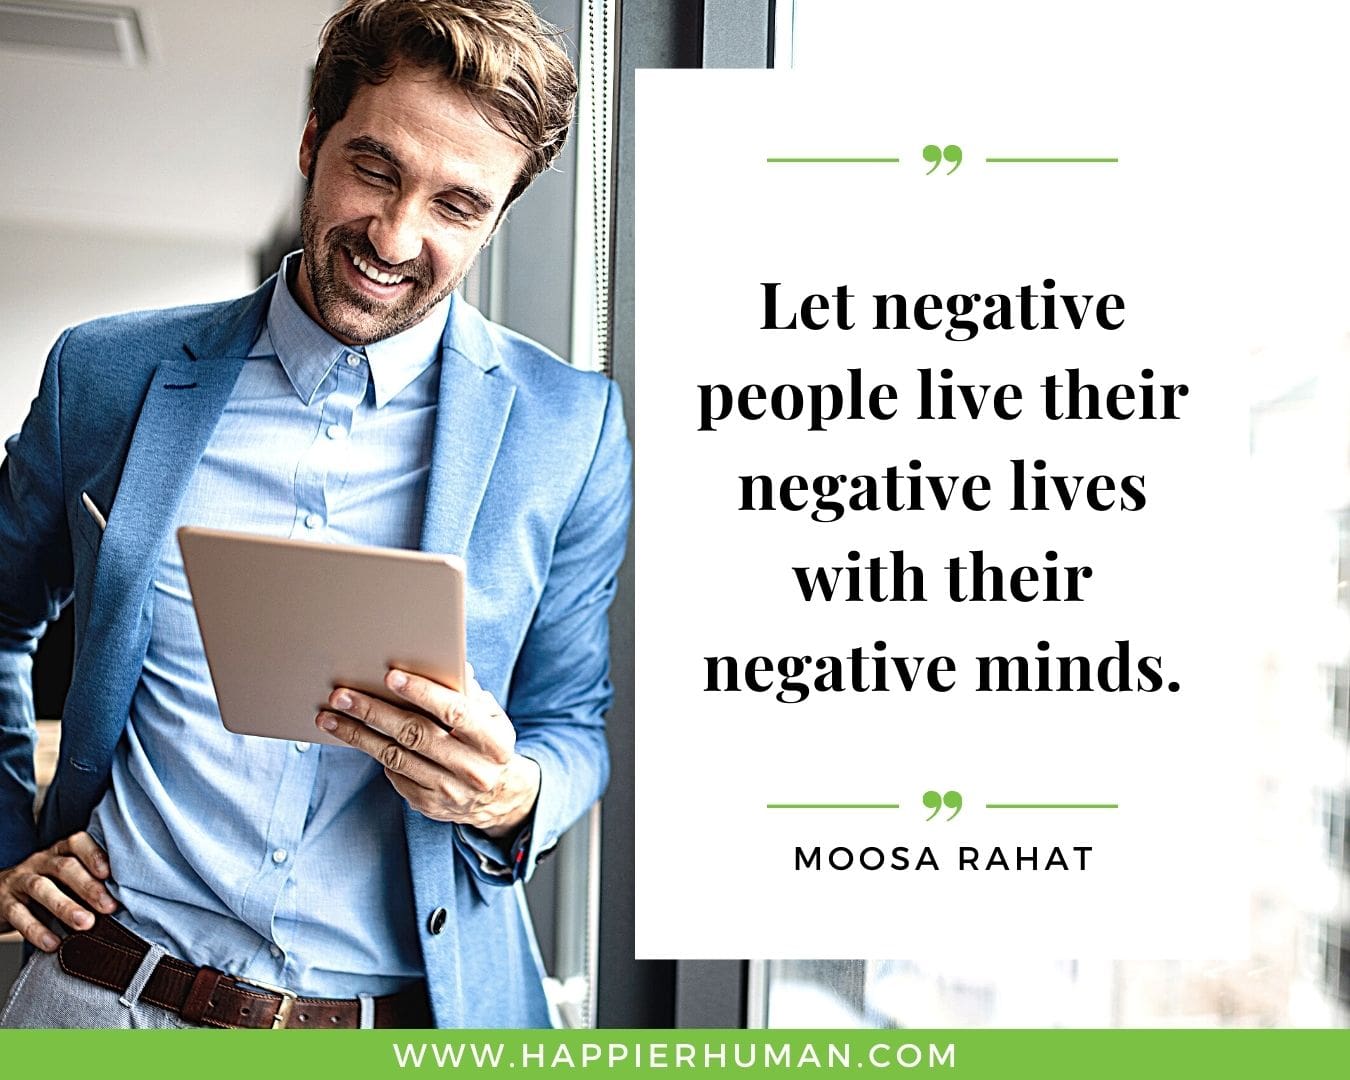 Toxic People Quotes - “Let negative people live their negative lives with their negative minds.” – Moosa Rahat